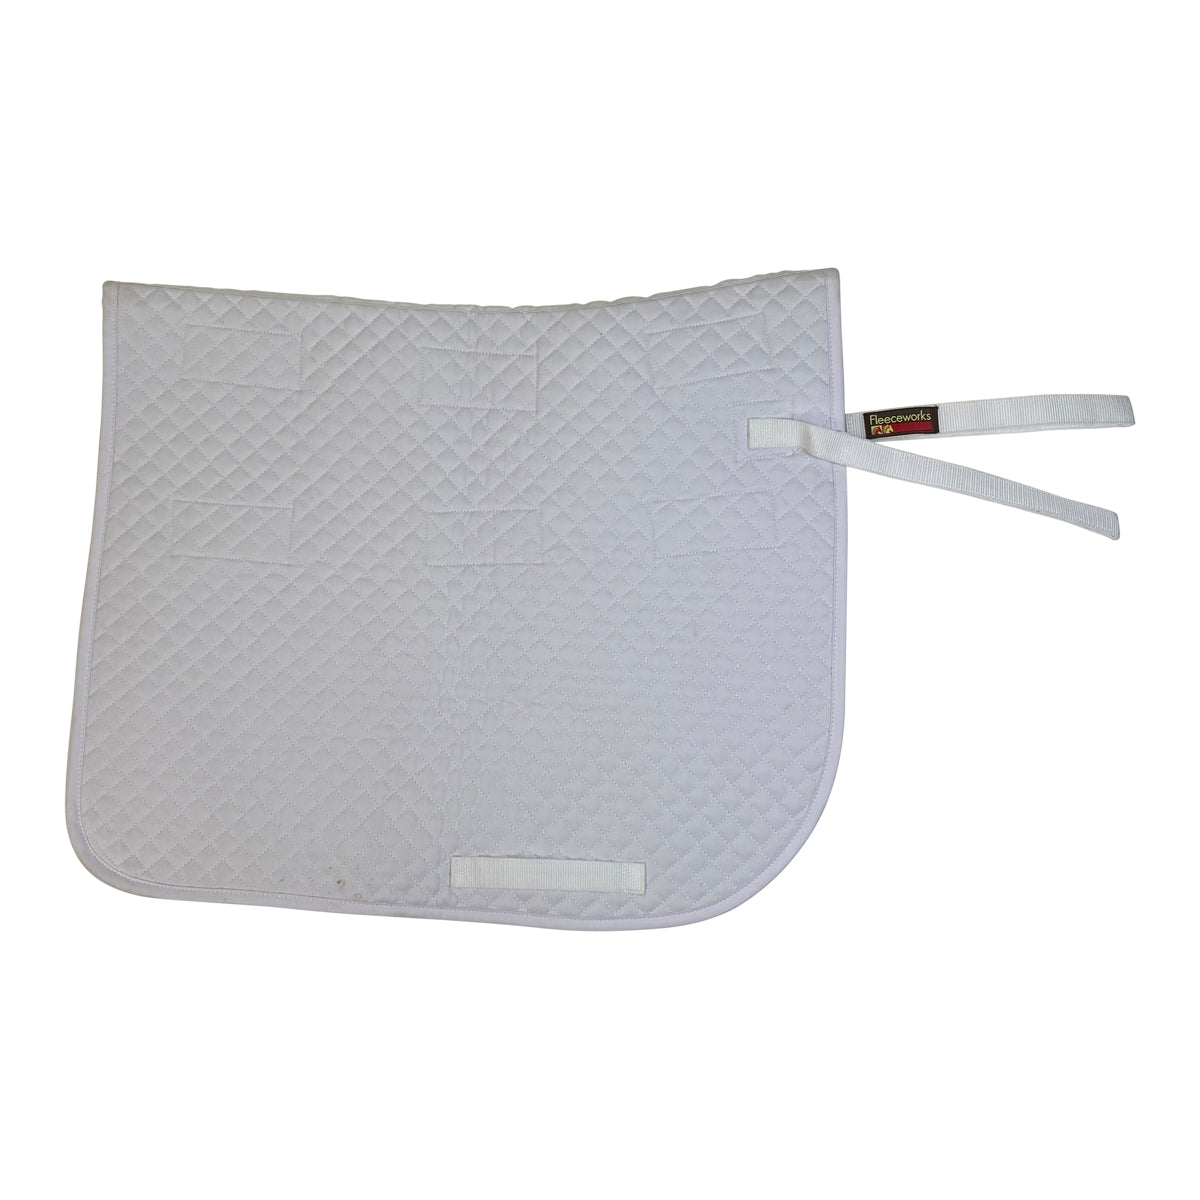 Fleeceworks Replacement Quilted Dressage Pad w/Velcro Web Only in White